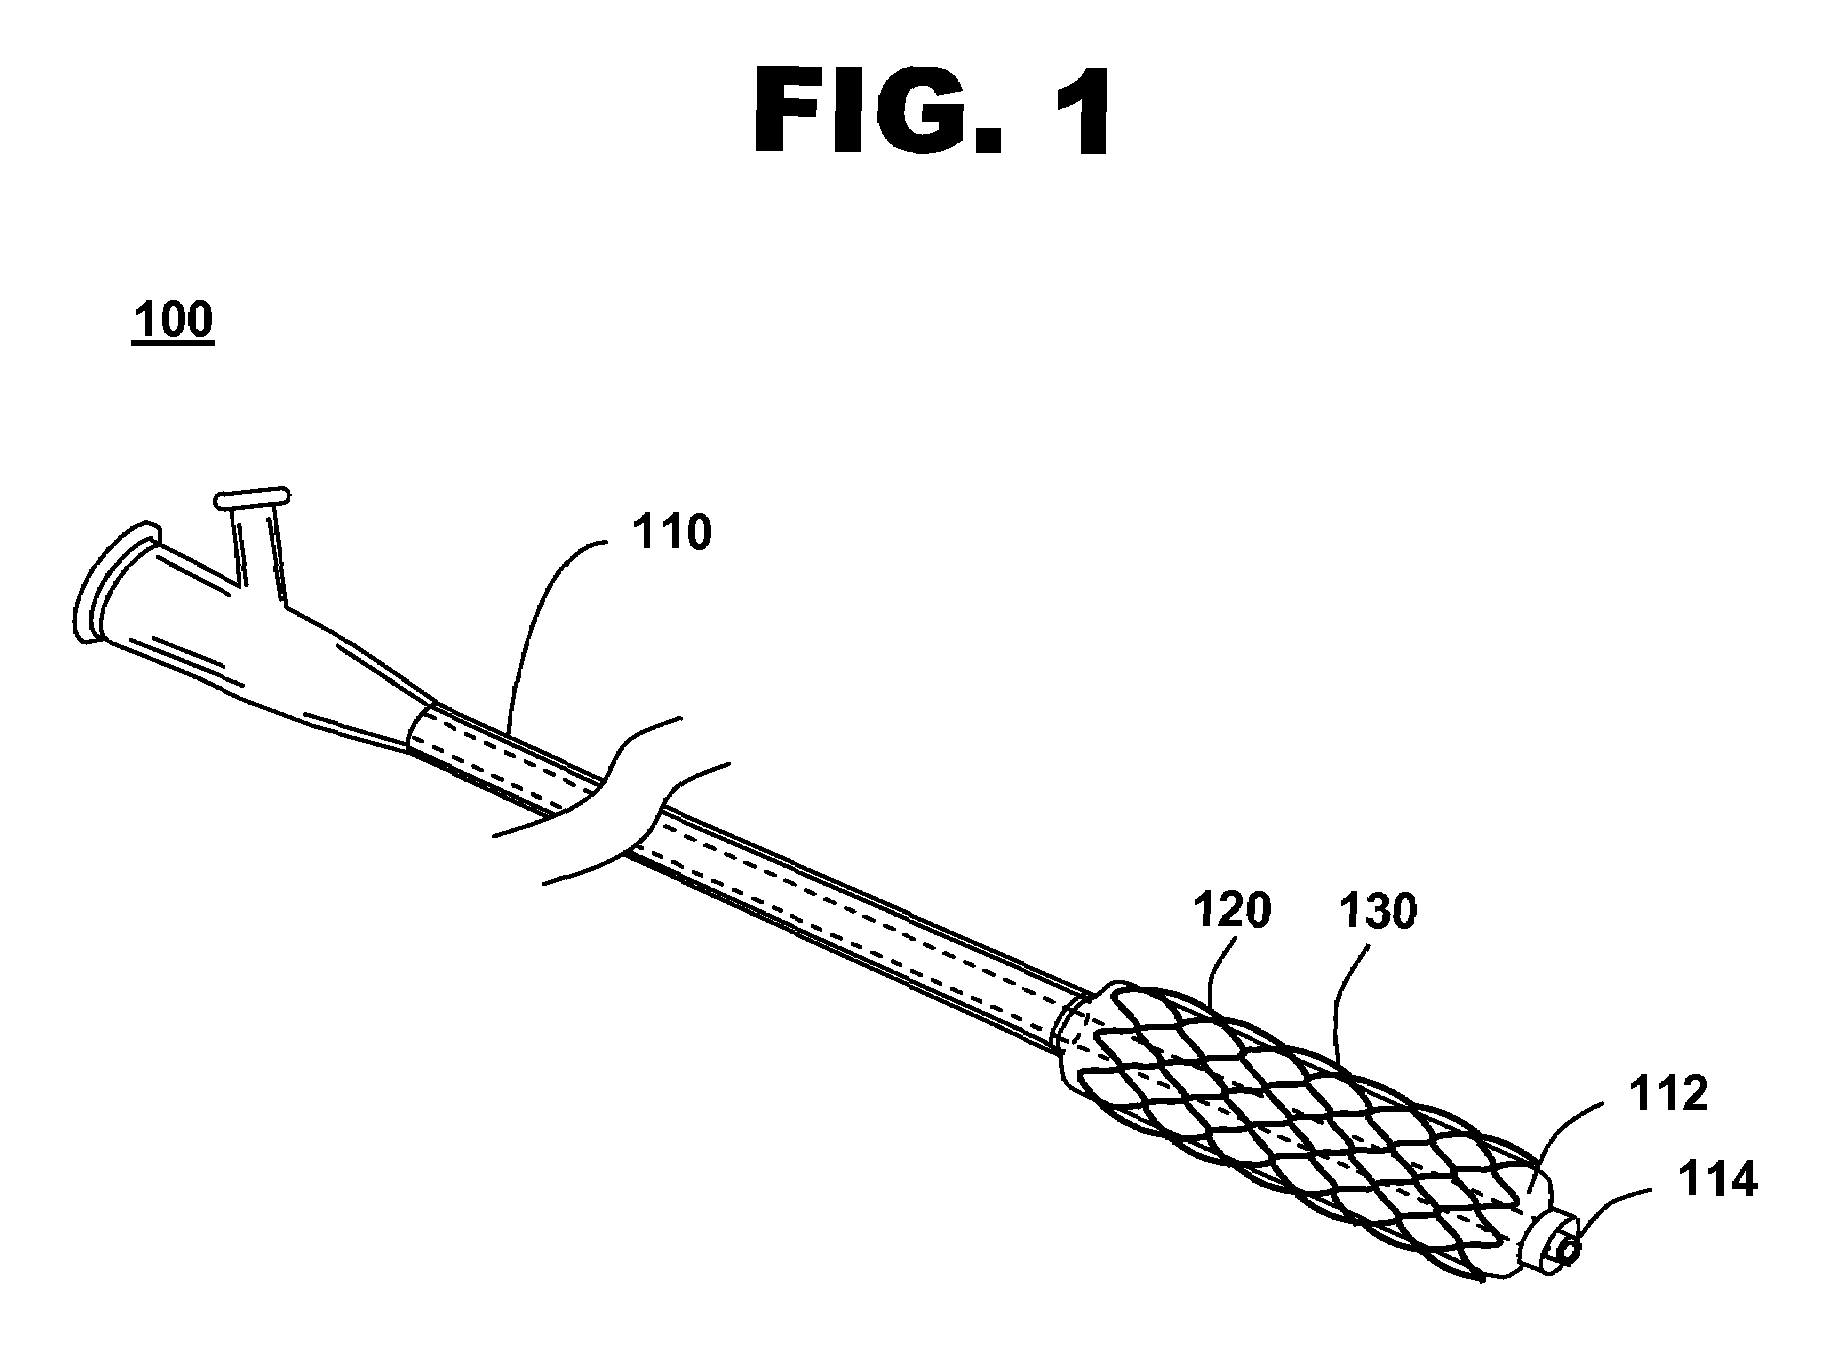 Implantable device with reservoirs for increased drug loading